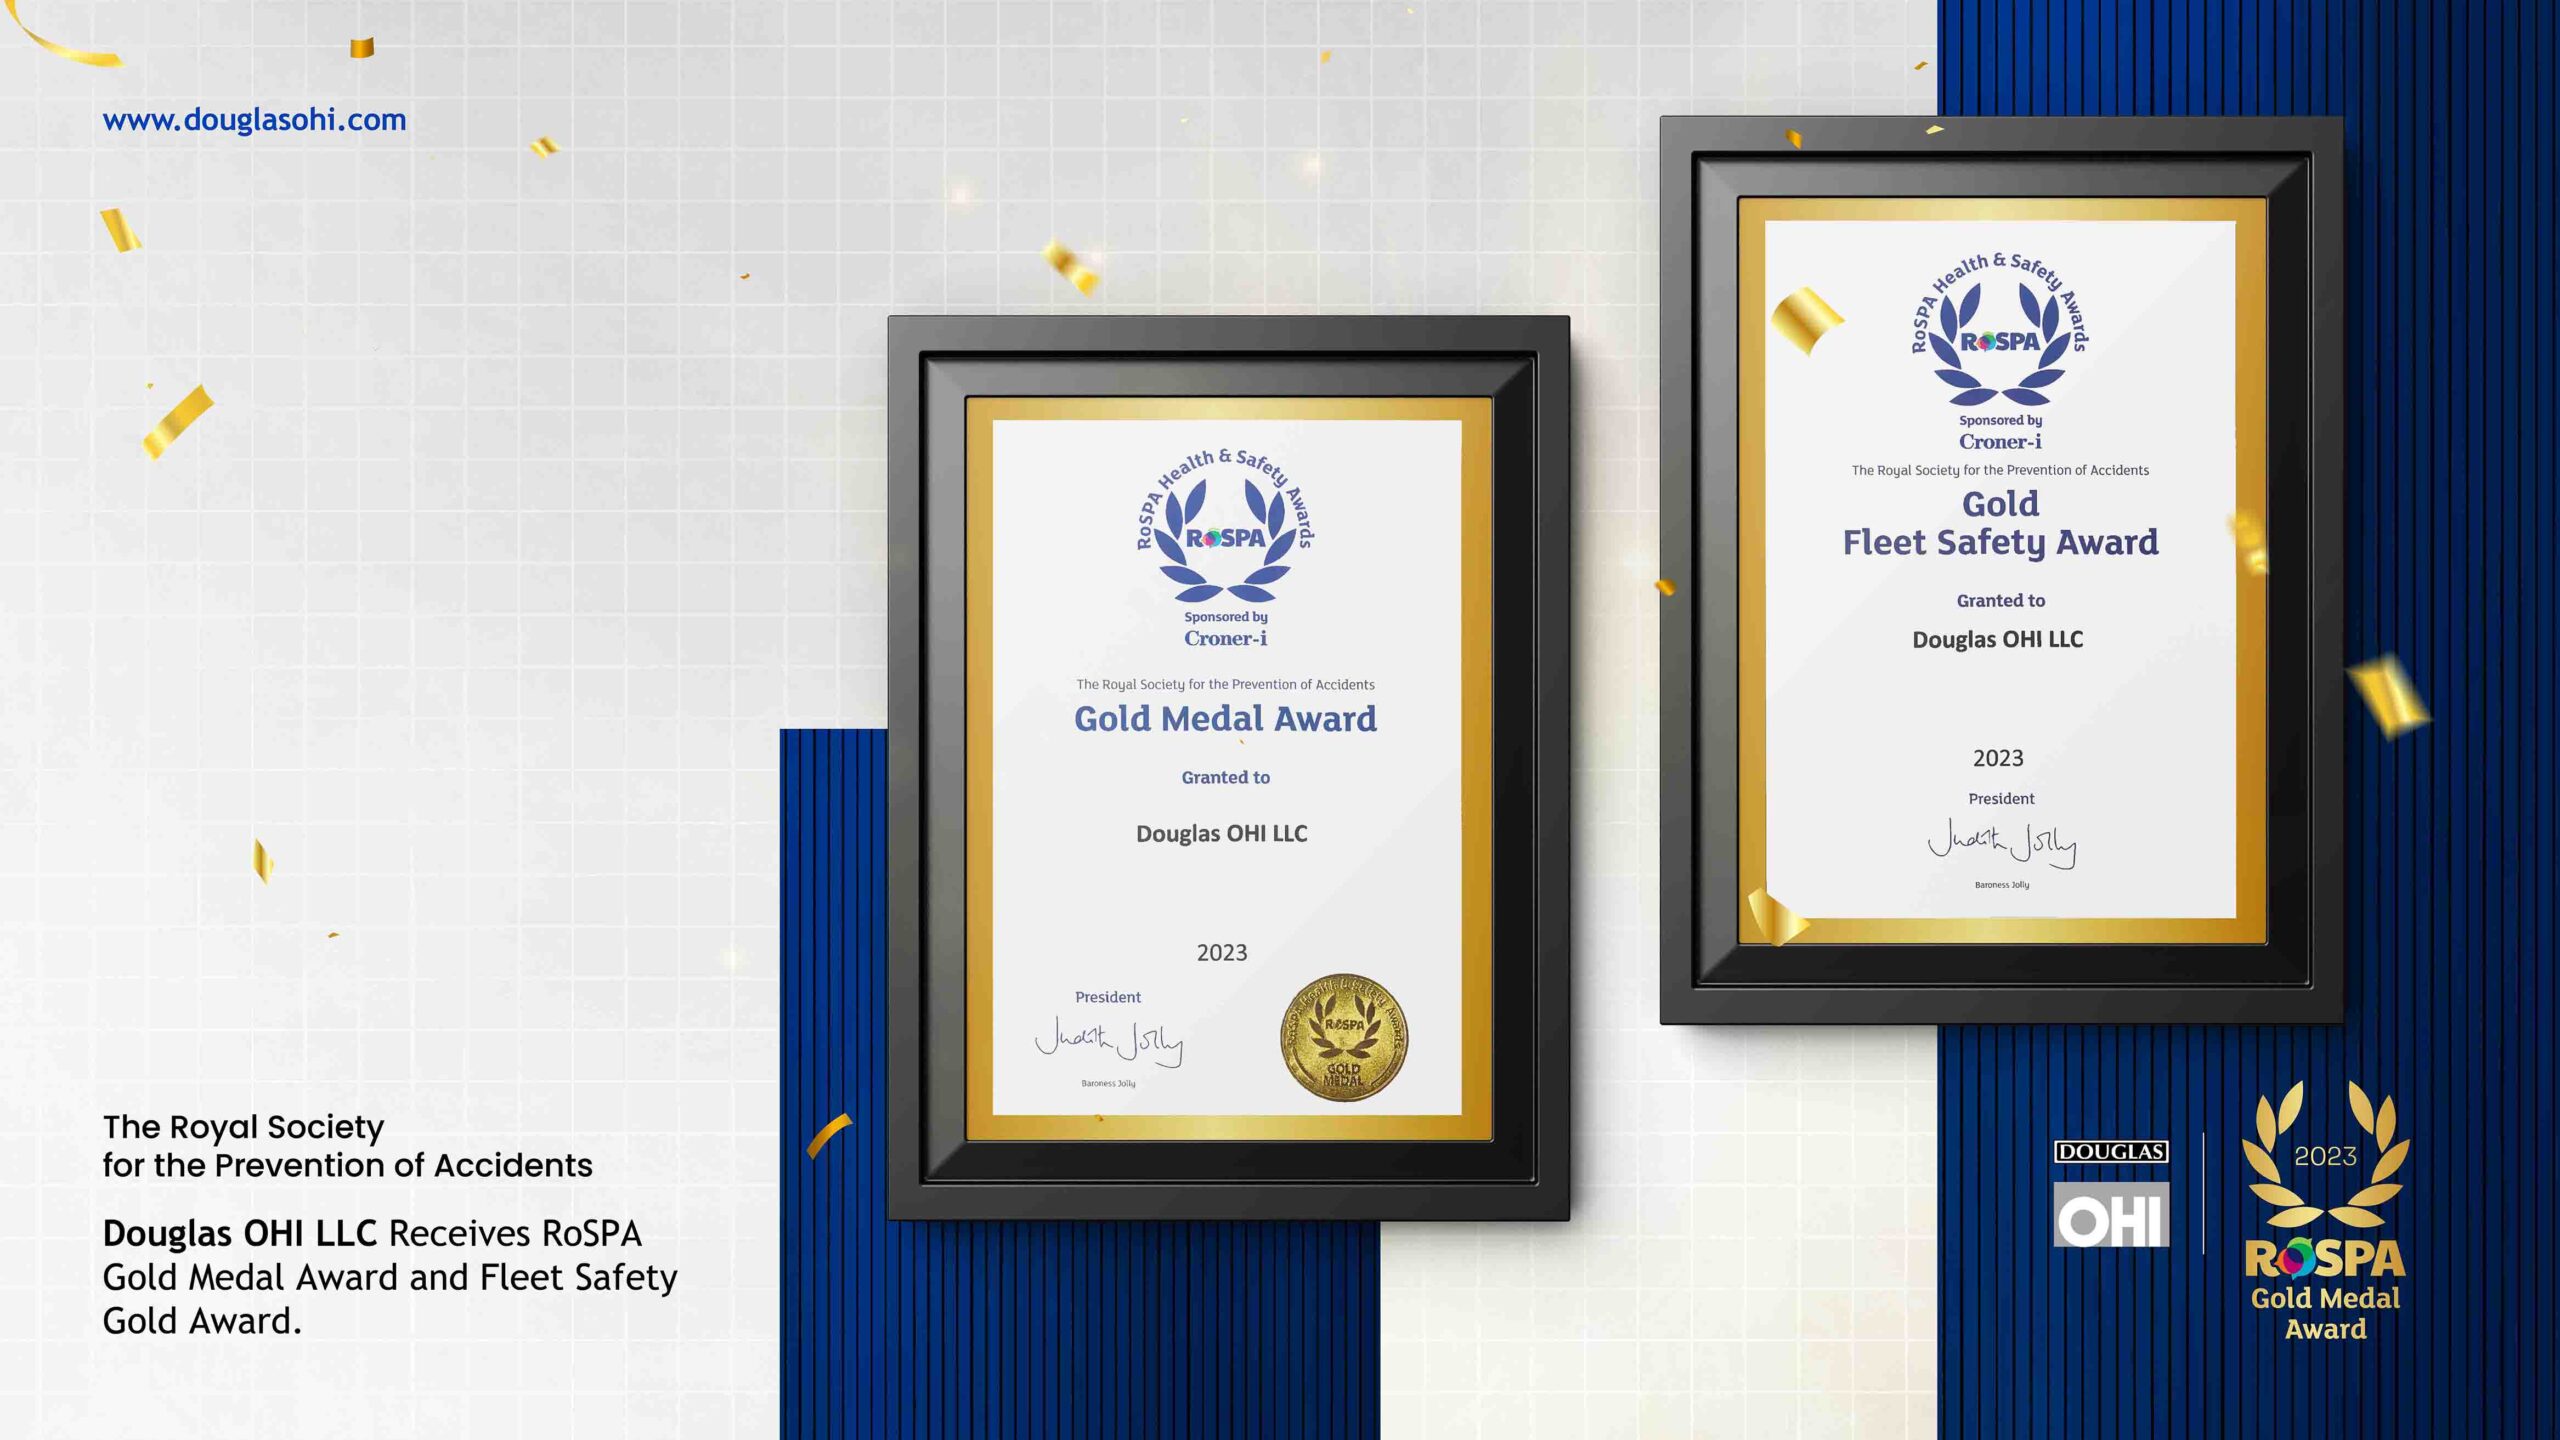 The Royal Society for the Prevention of Accidents (RoSPA) 2023 Gold Medal Award and Fleet Safety Gold Award for Douglas OHI's Health and Safety (HSSE) Practices